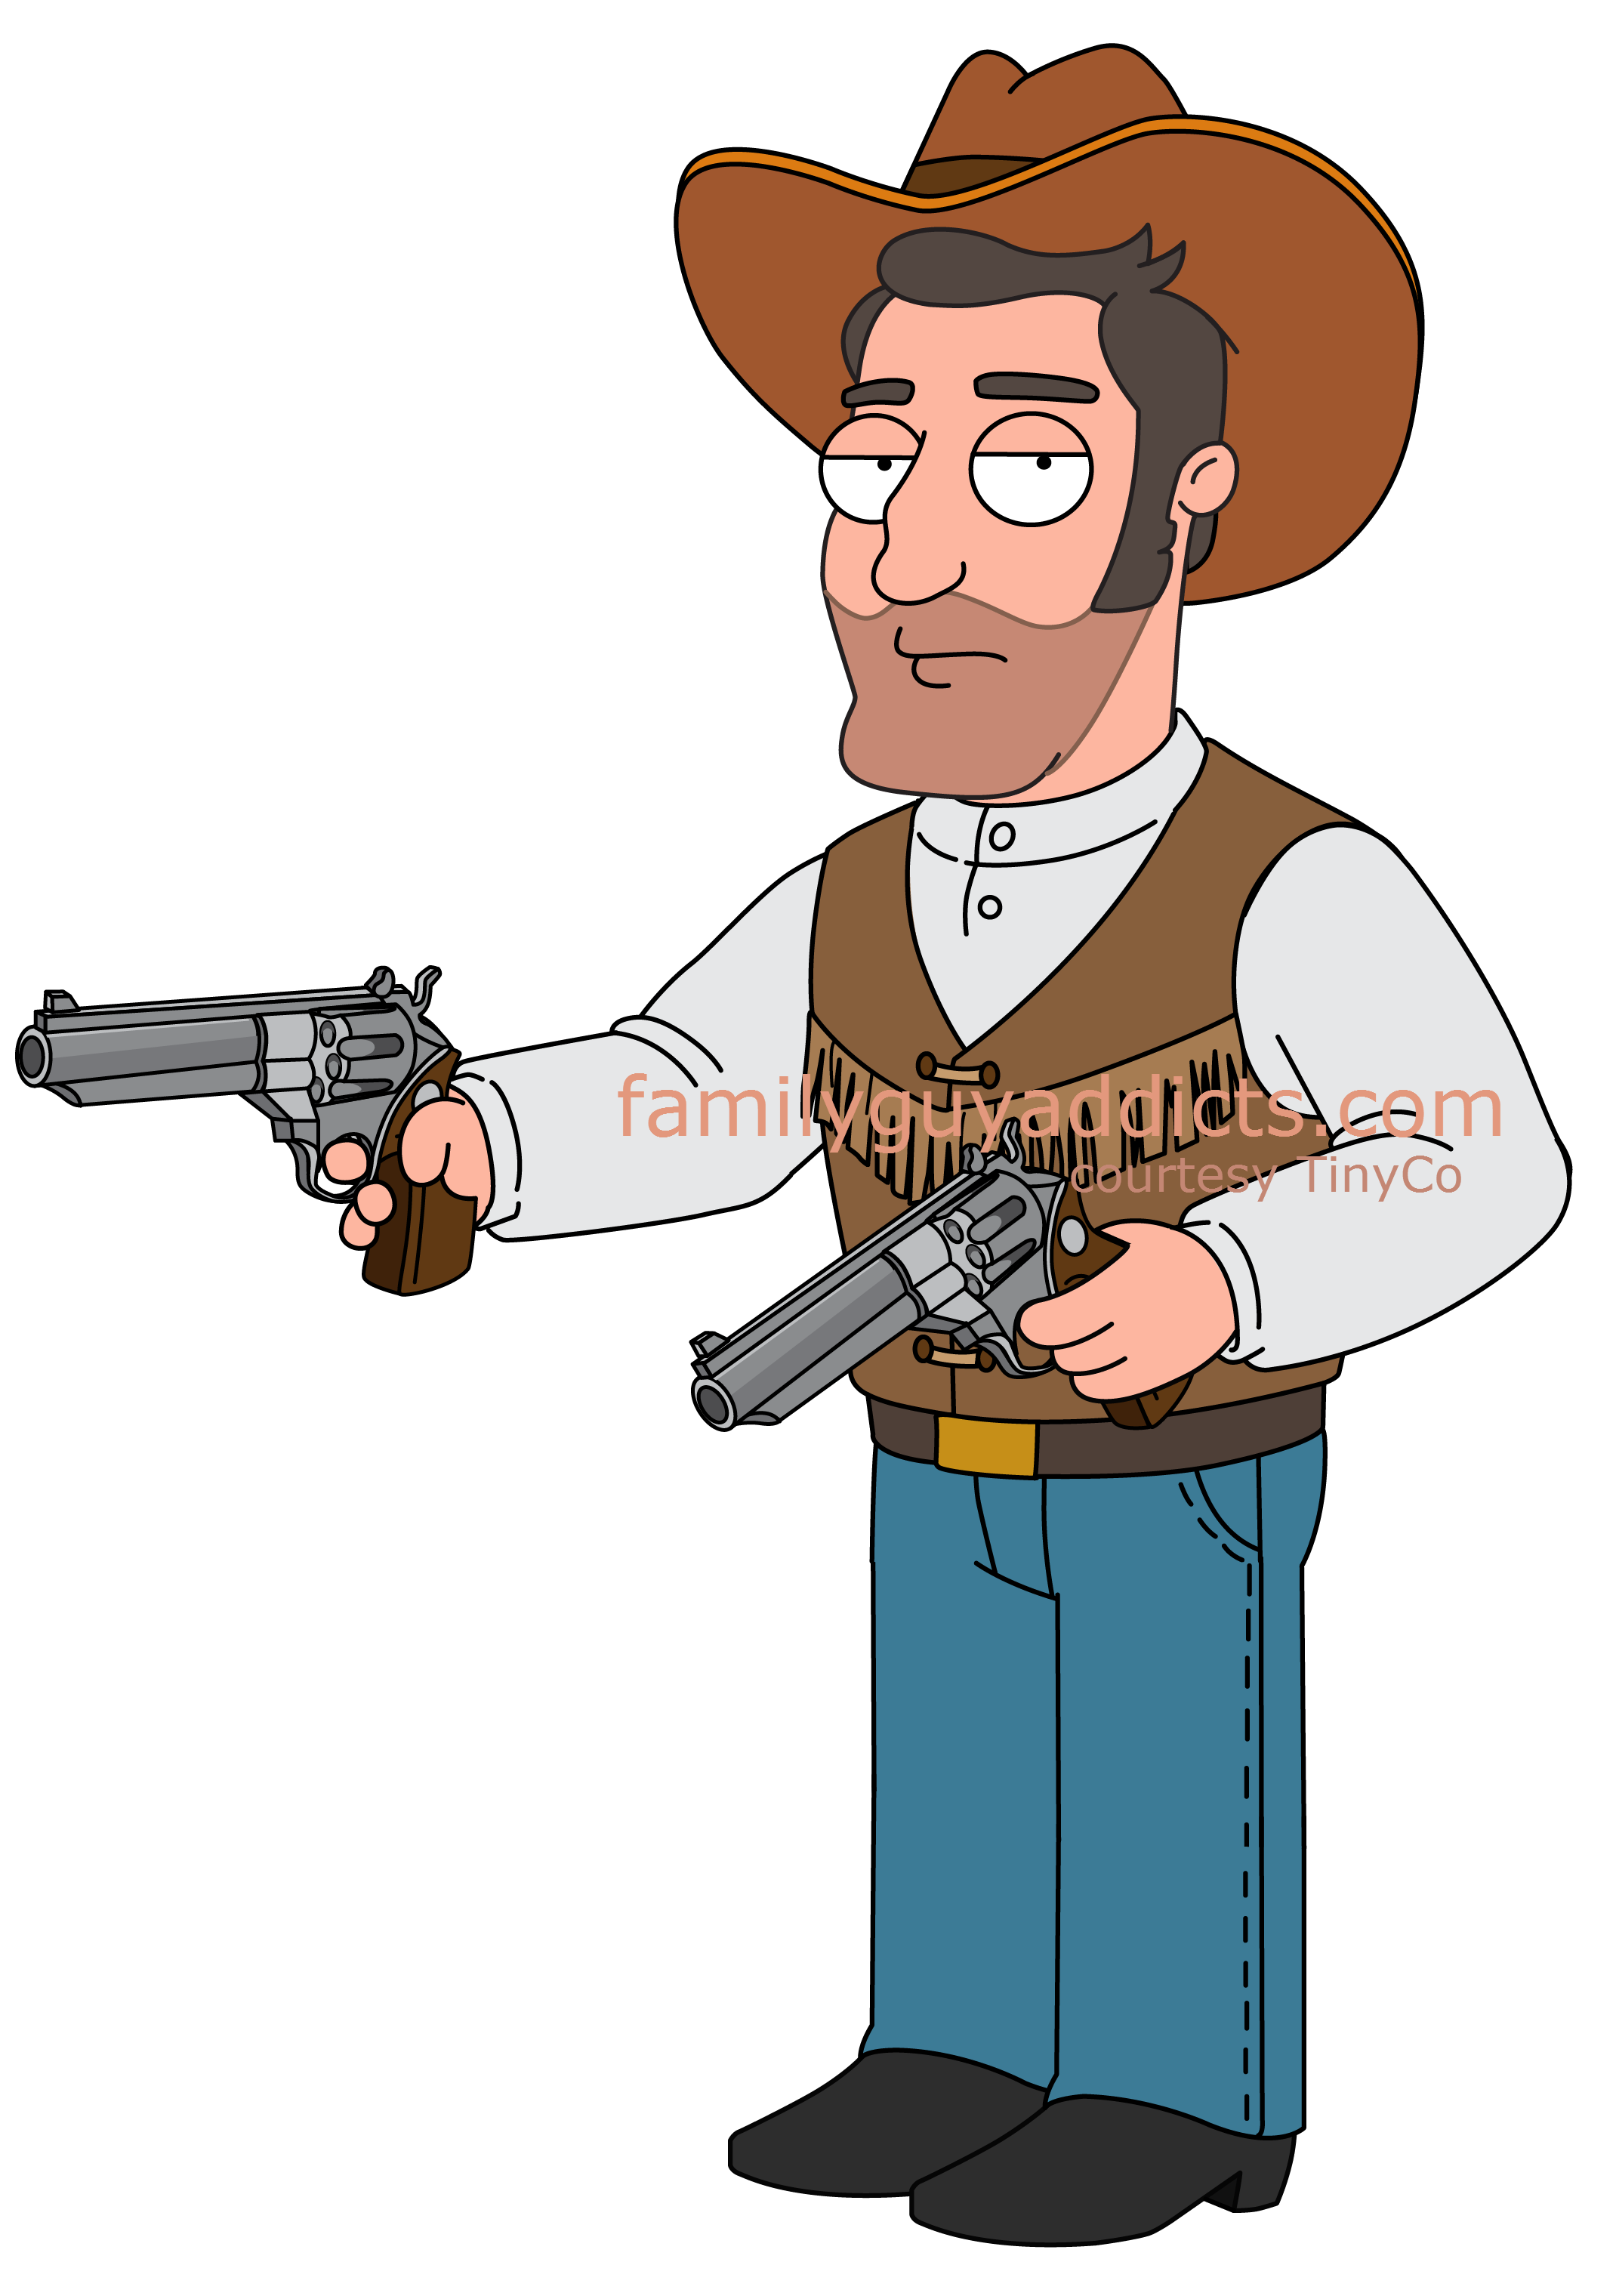 Cowboy frames illustrations hd. Drivers license clipart family guy